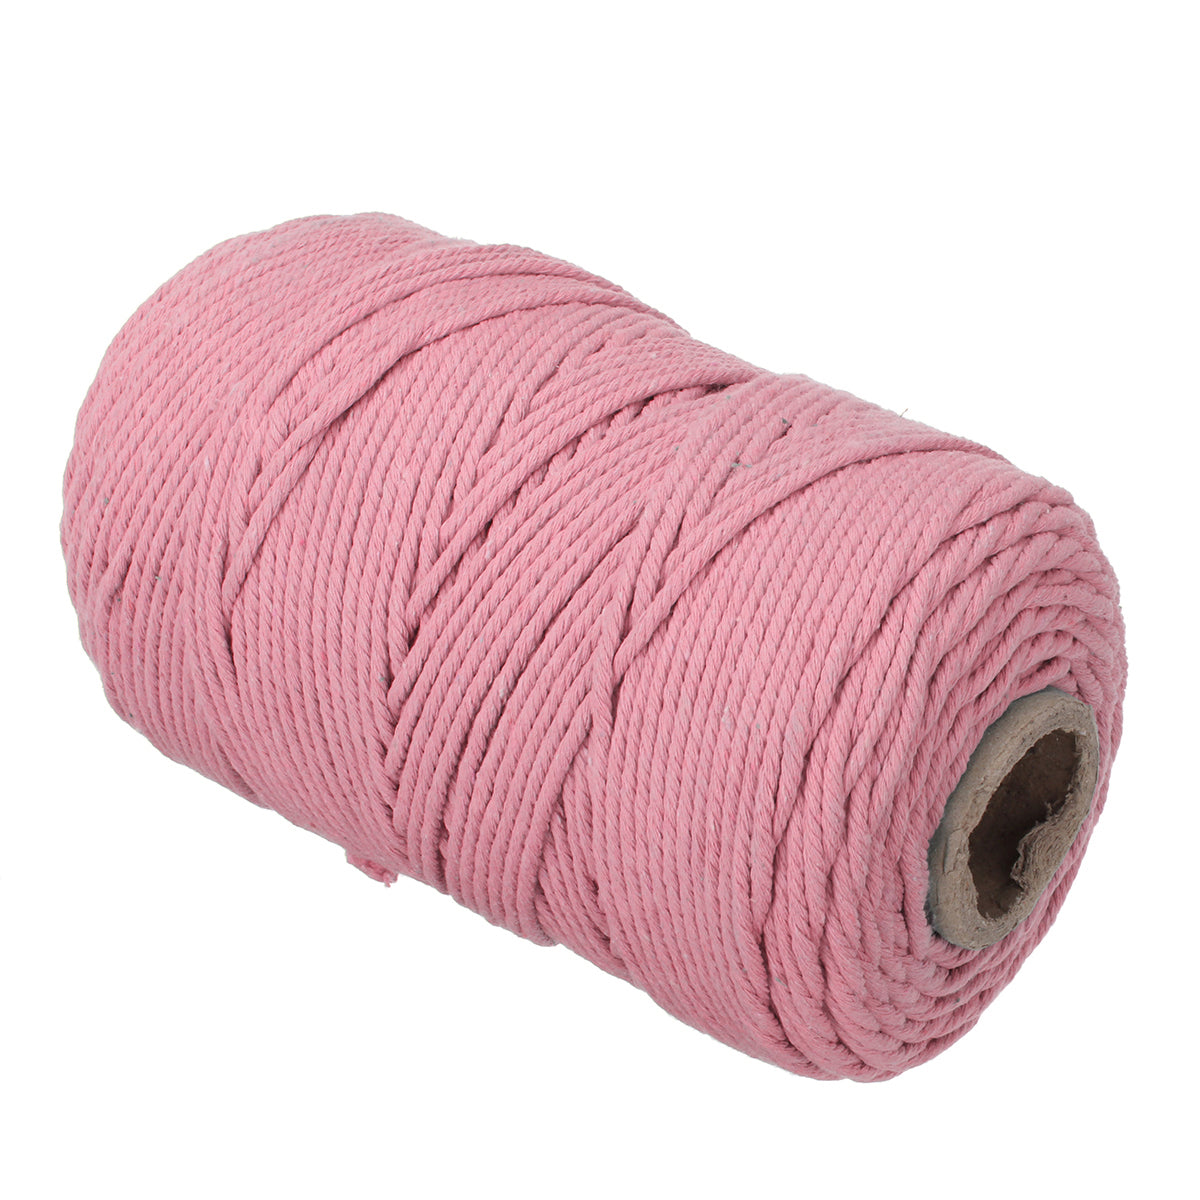 200M 3mm 100% Natural Cotton Twisted Cord Crafts DIY Macrame String Decorations